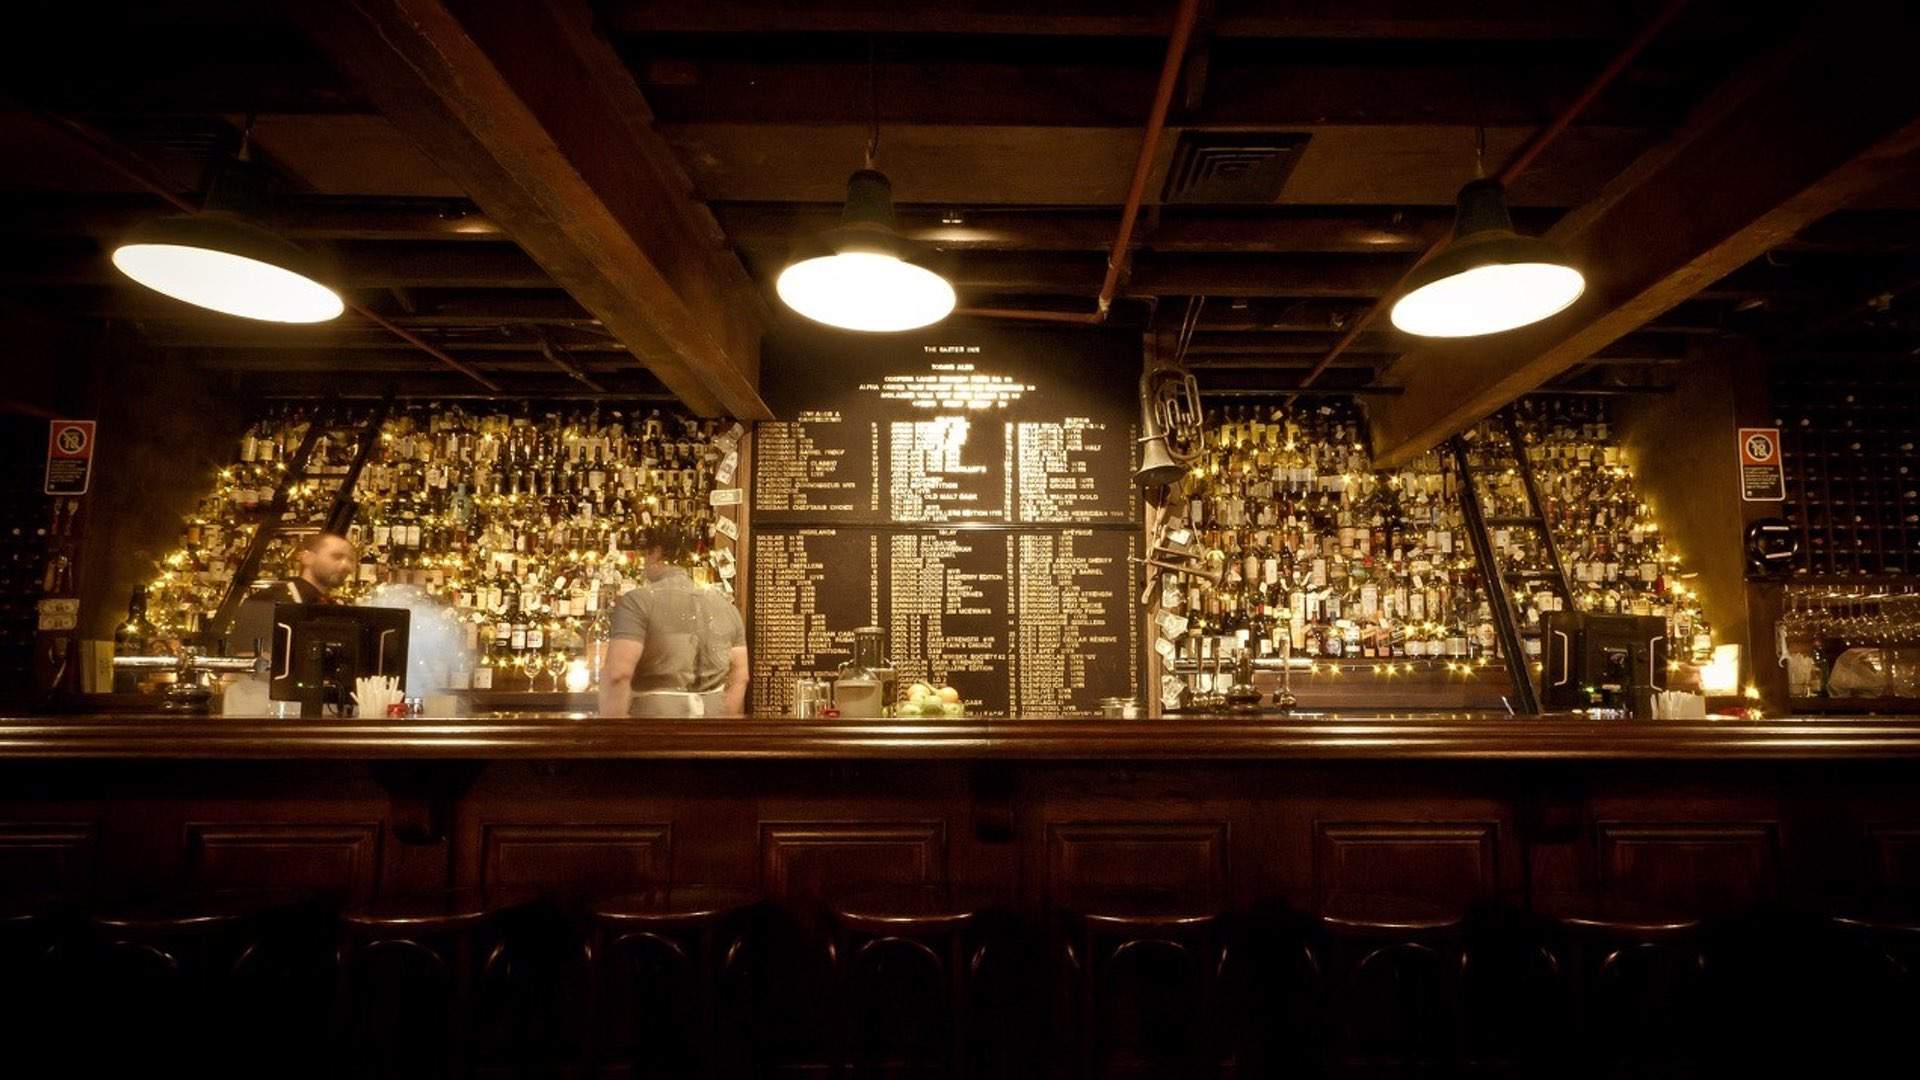 This Sydney Bar Has Been Named as One of the World's 50 Best Bars for 2017